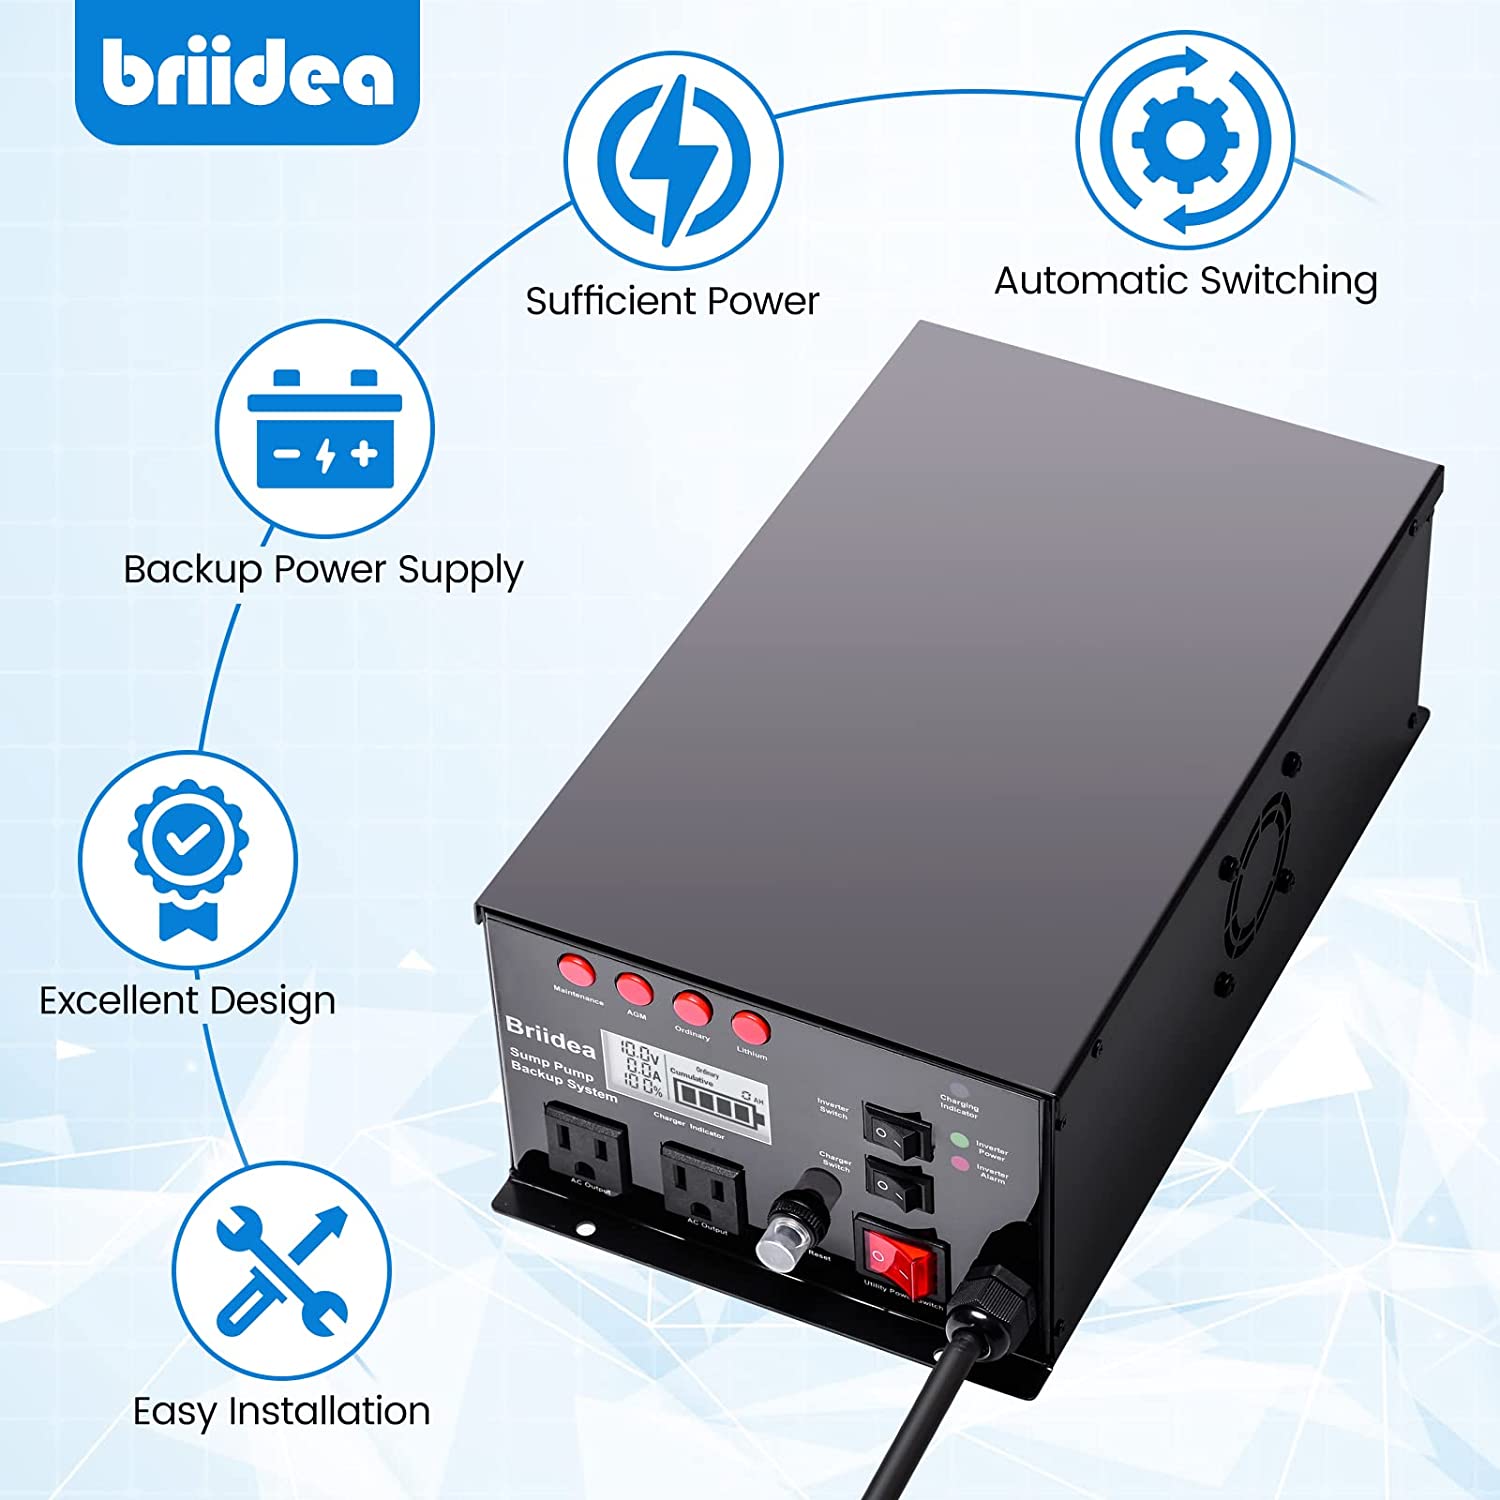 Briidea 1500W Sump Pump Battery Backup System - Auto Switches to Battery Inverter Power for Continuous Sump Pump Operation during Power Outages